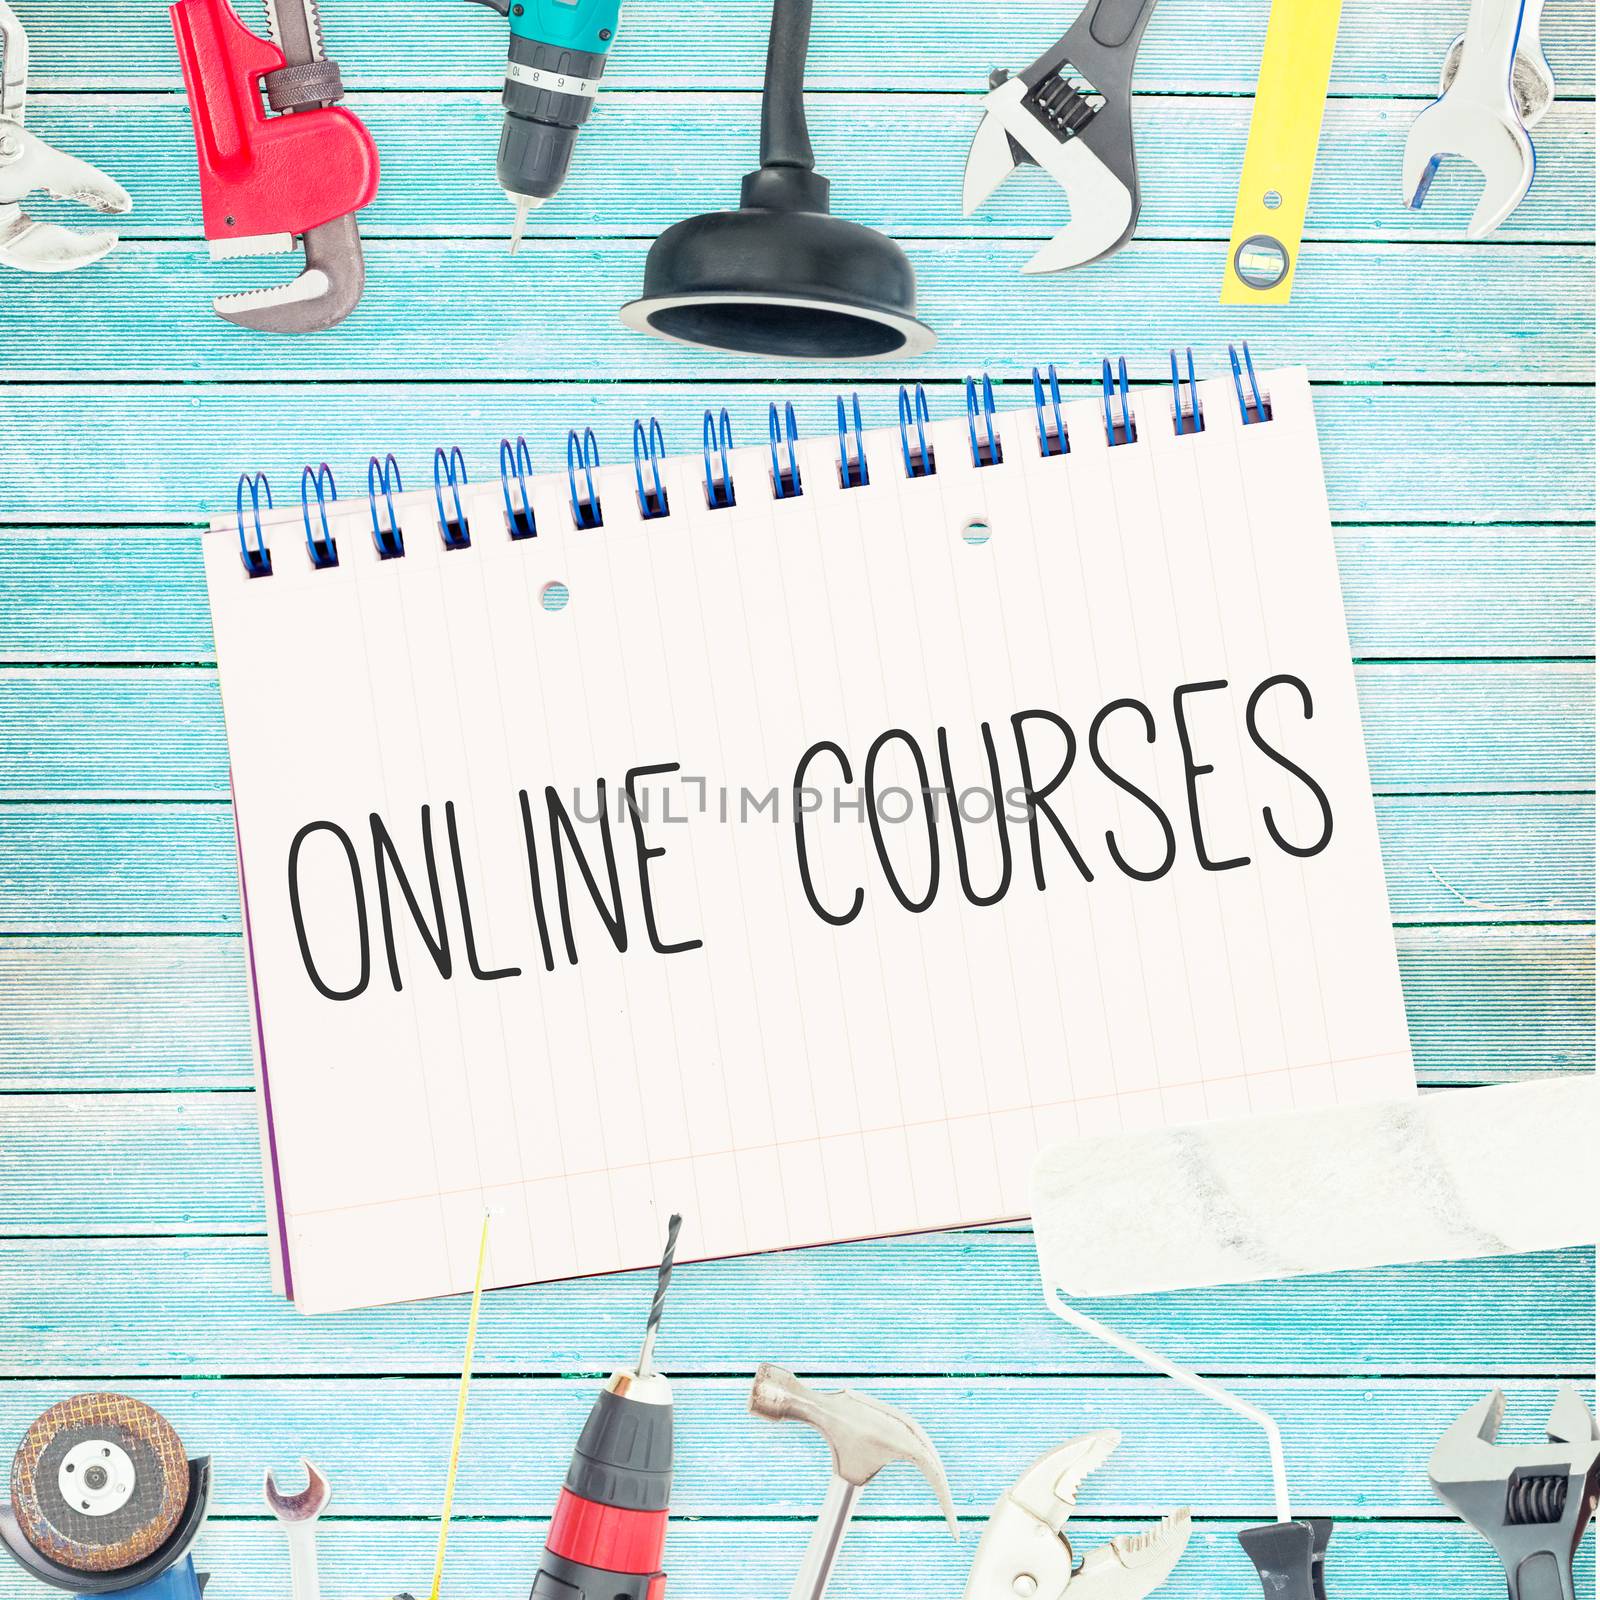 The word online courses against tools and notepad on wooden background